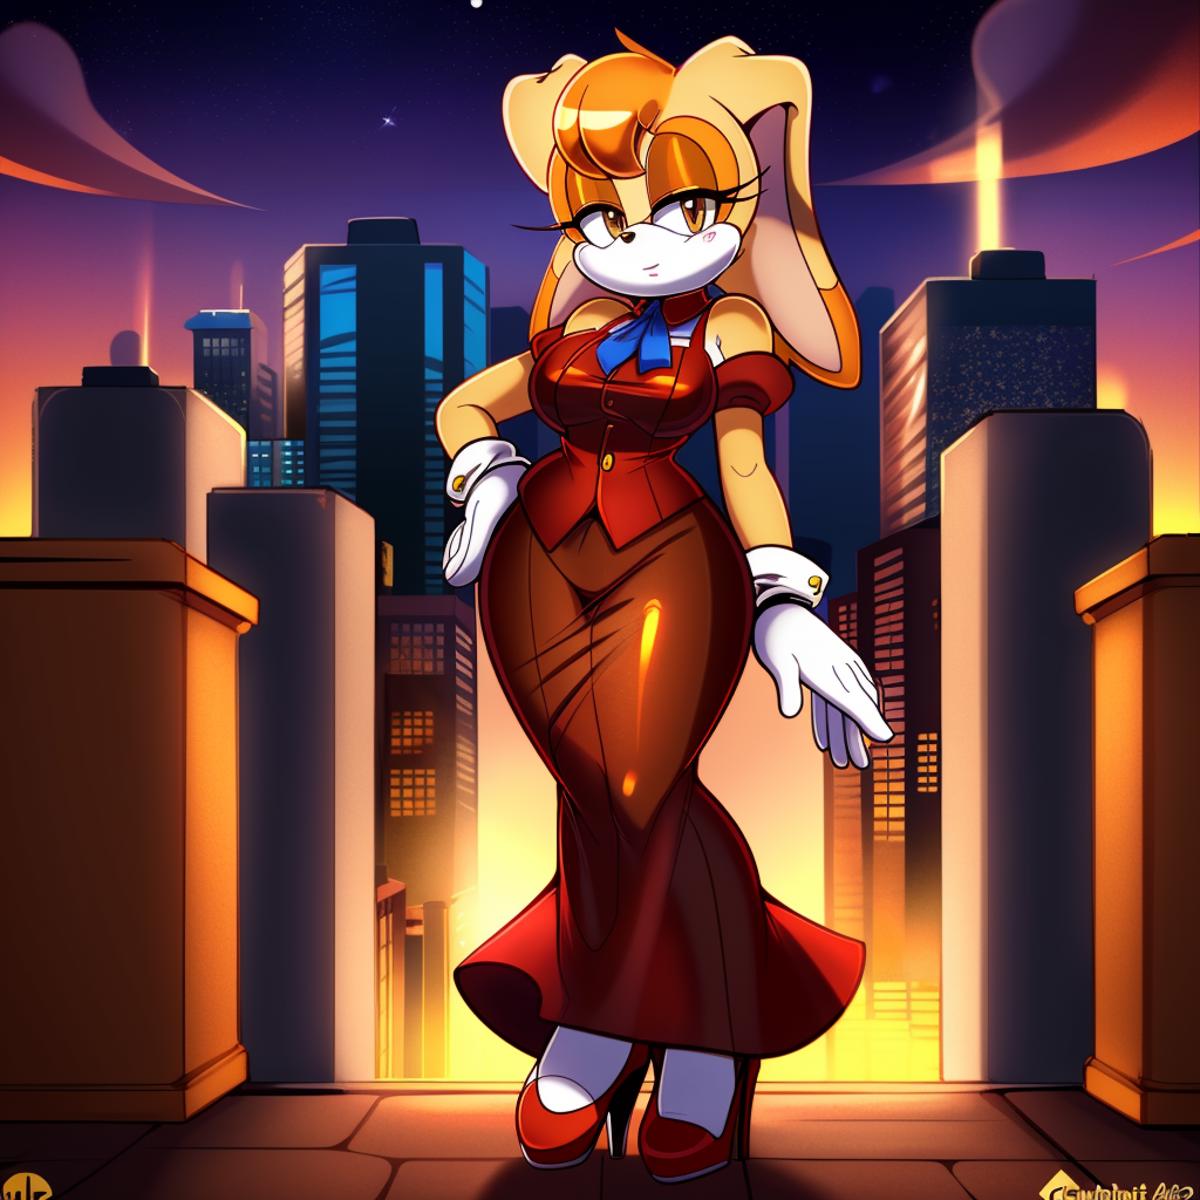 Vanilla The Rabbit image by Aigenerater